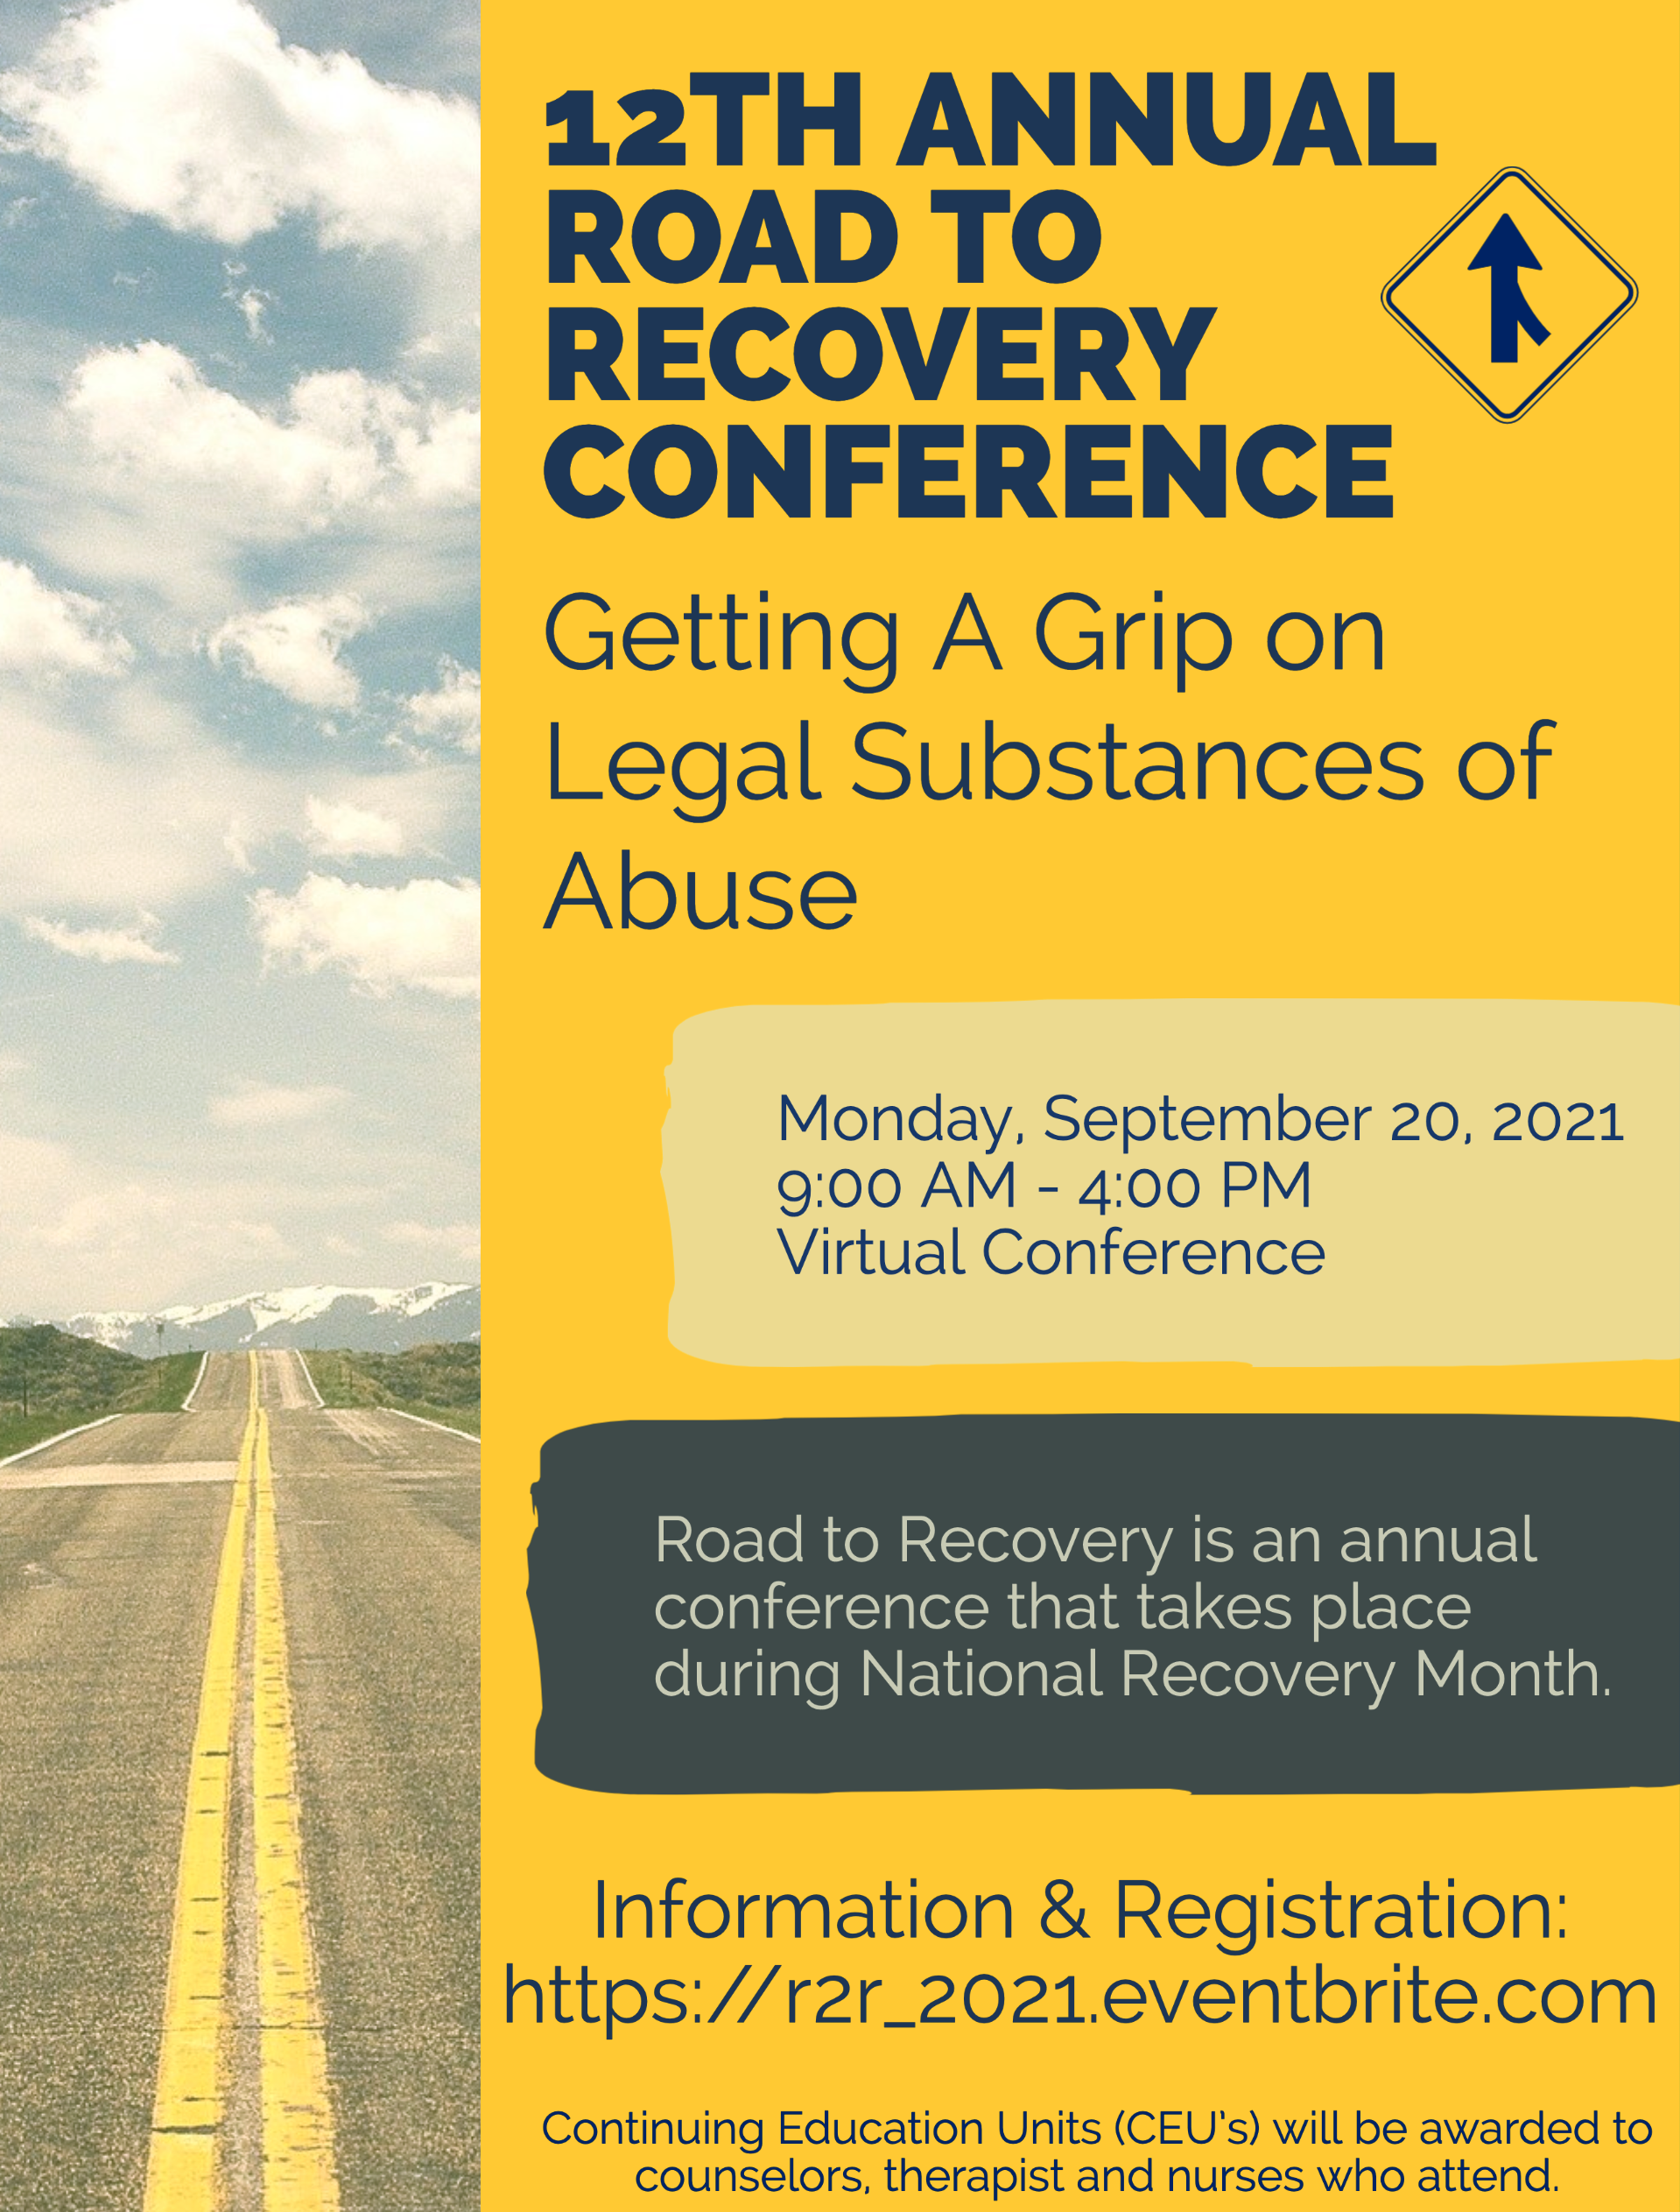 12th Annual Road To Recover Conference Flyer